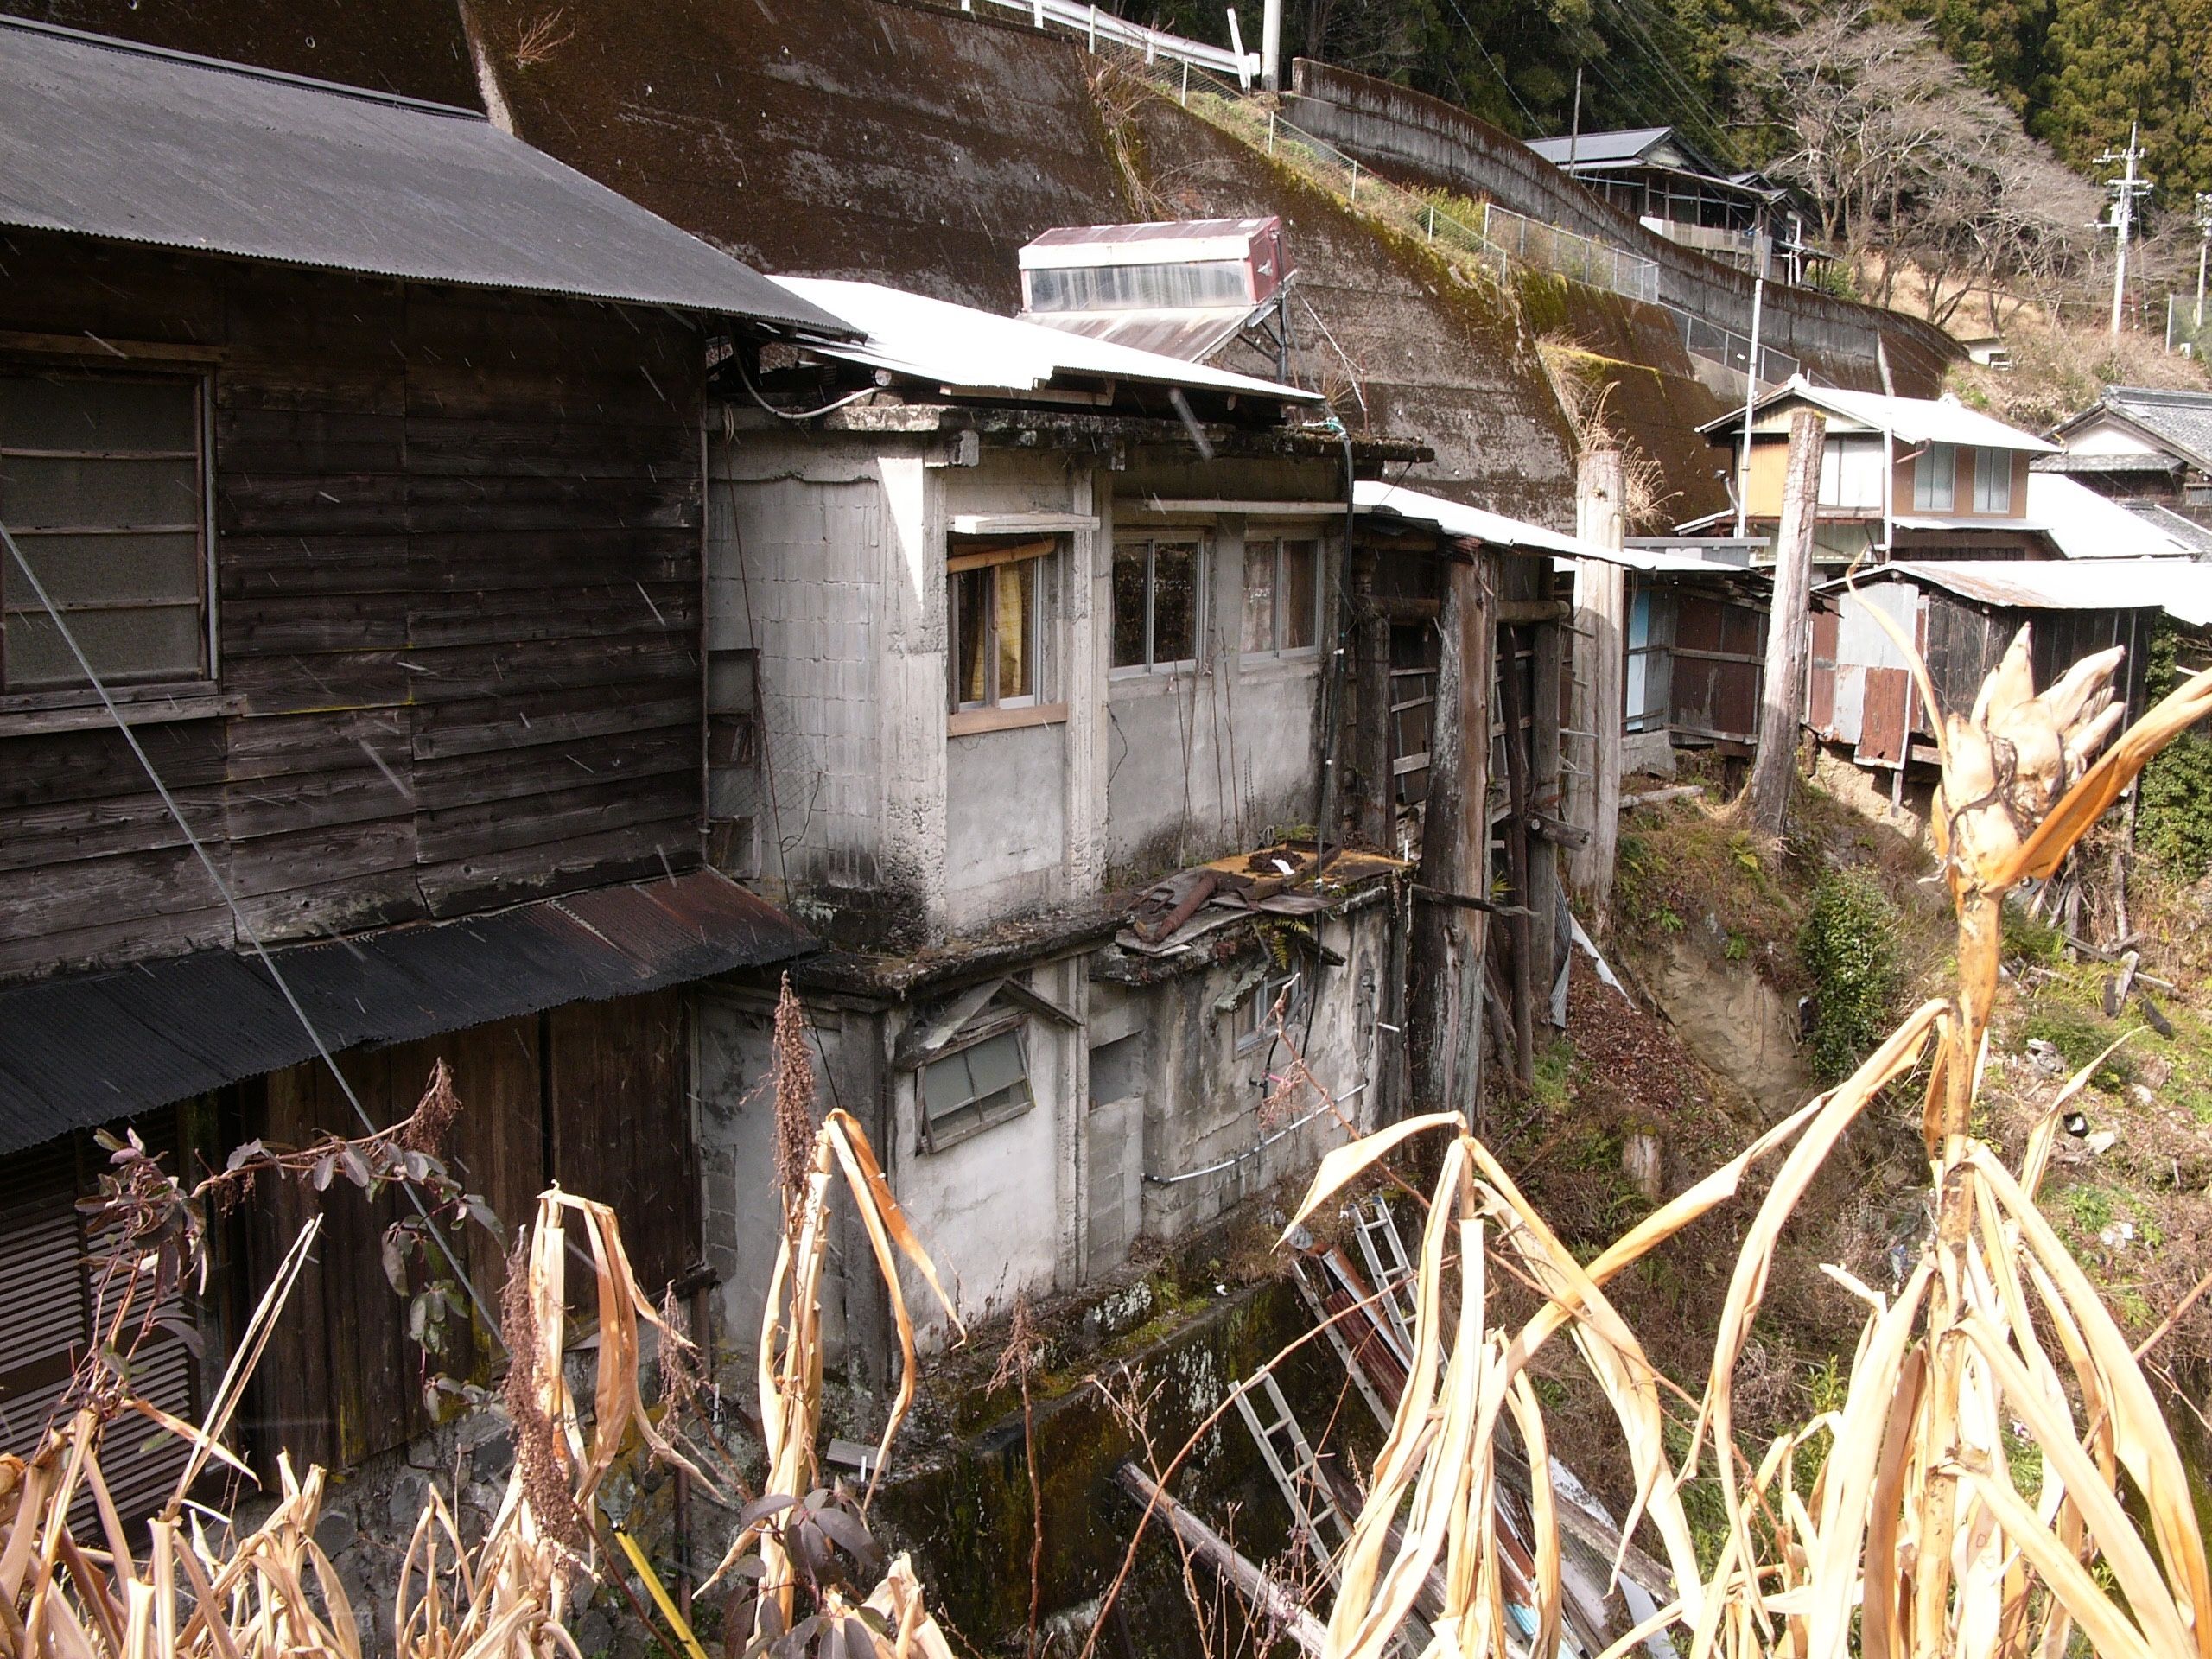 Old, crumbling houses built on the steep bank of a stream.